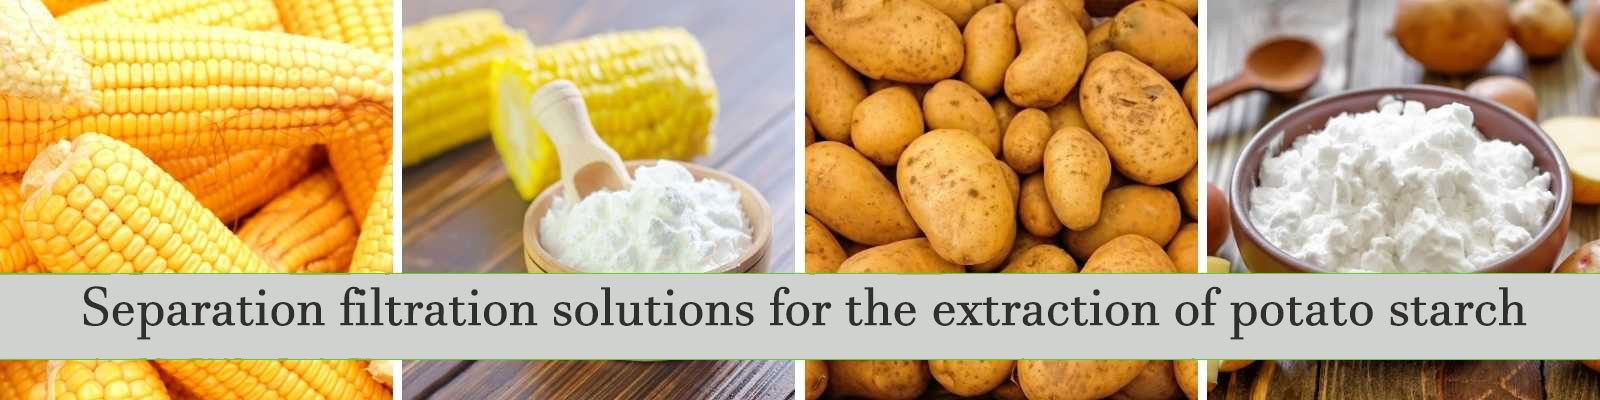 Professional Filtration Equipment for the Potato Starch Industry